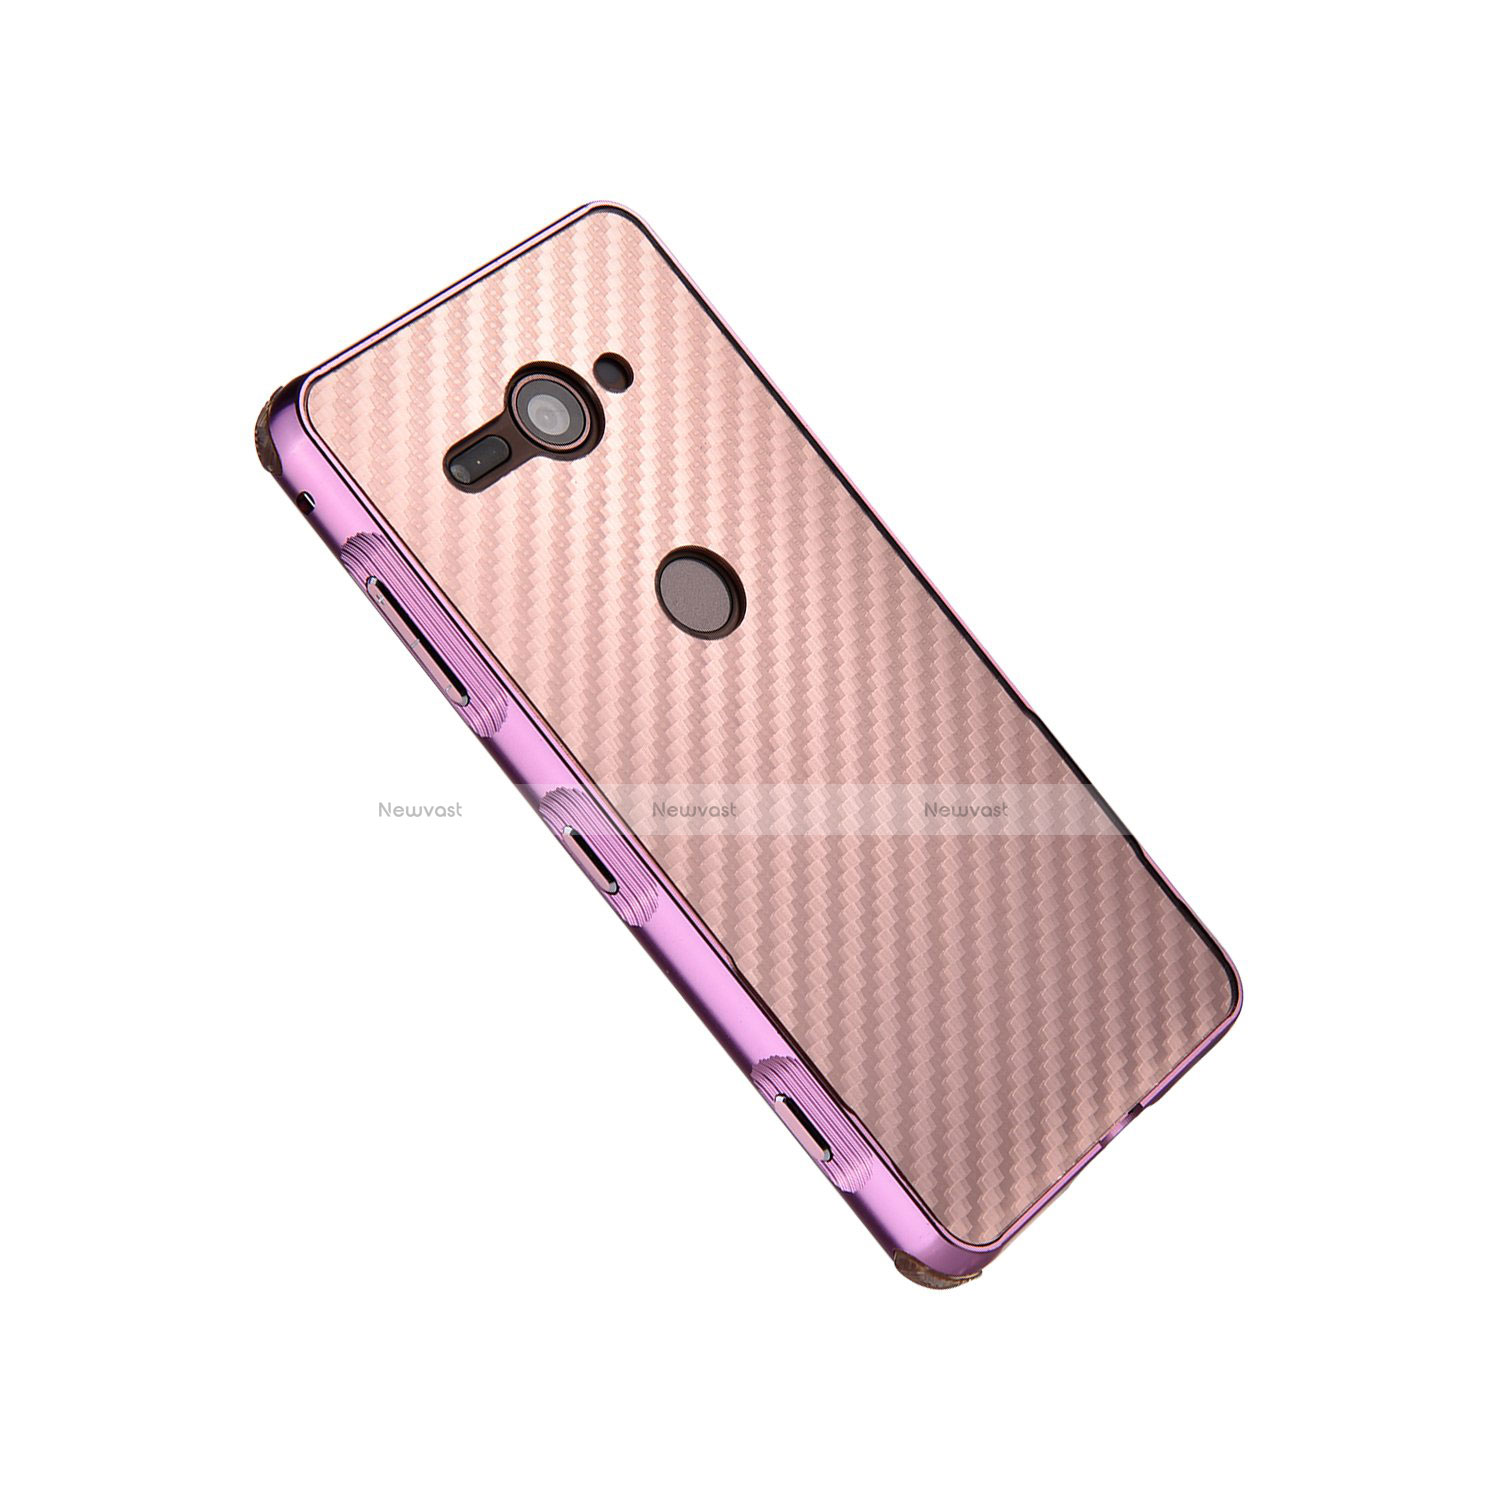 Luxury Aluminum Metal Frame Cover Case for Sony Xperia XZ2 Compact